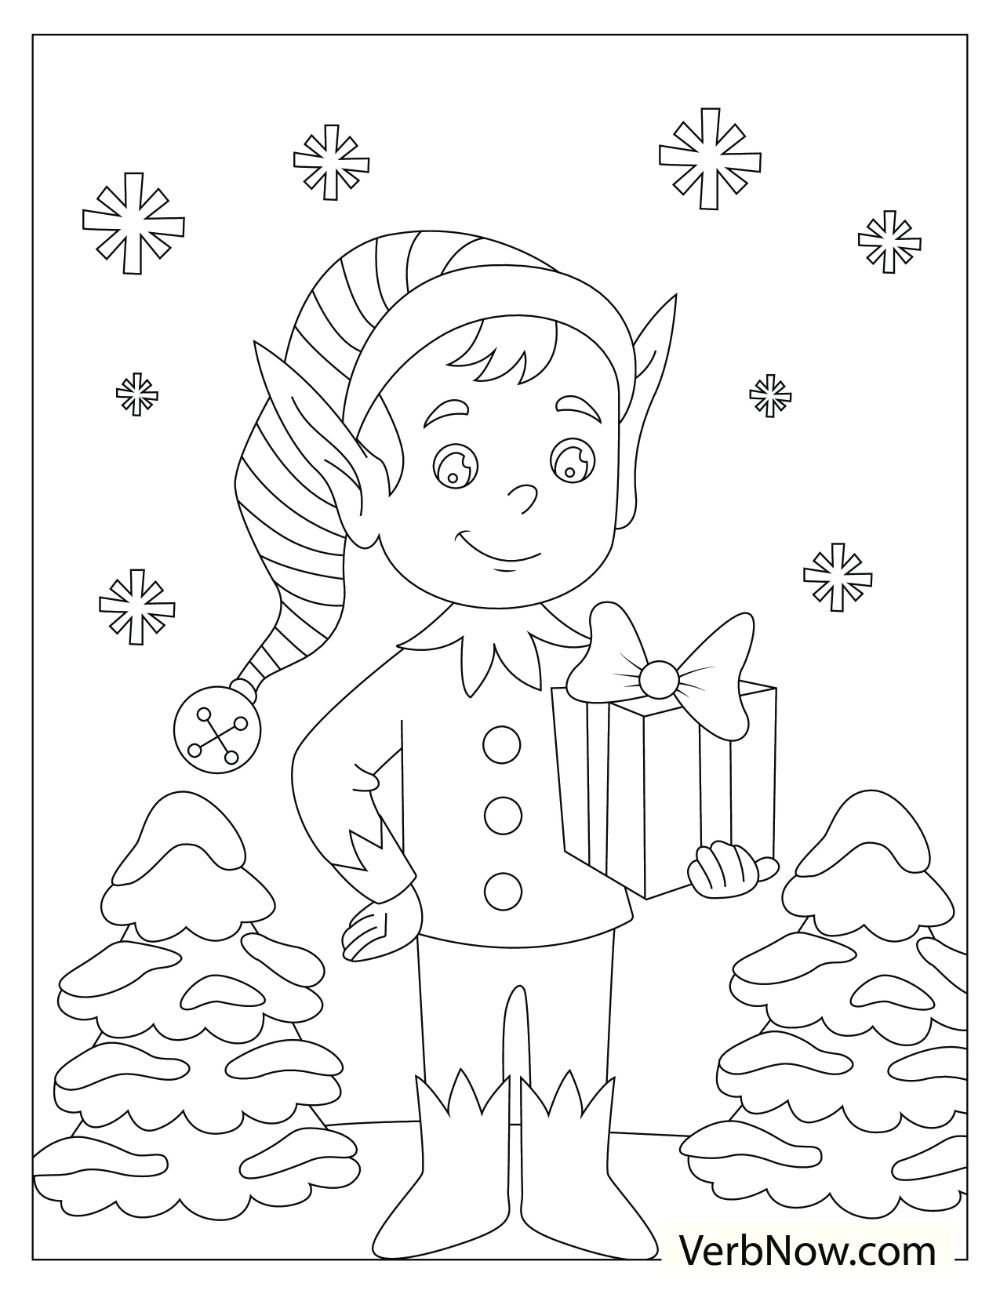 Free ELF Coloring Pages & Book for Download (PDF) - VerbNow